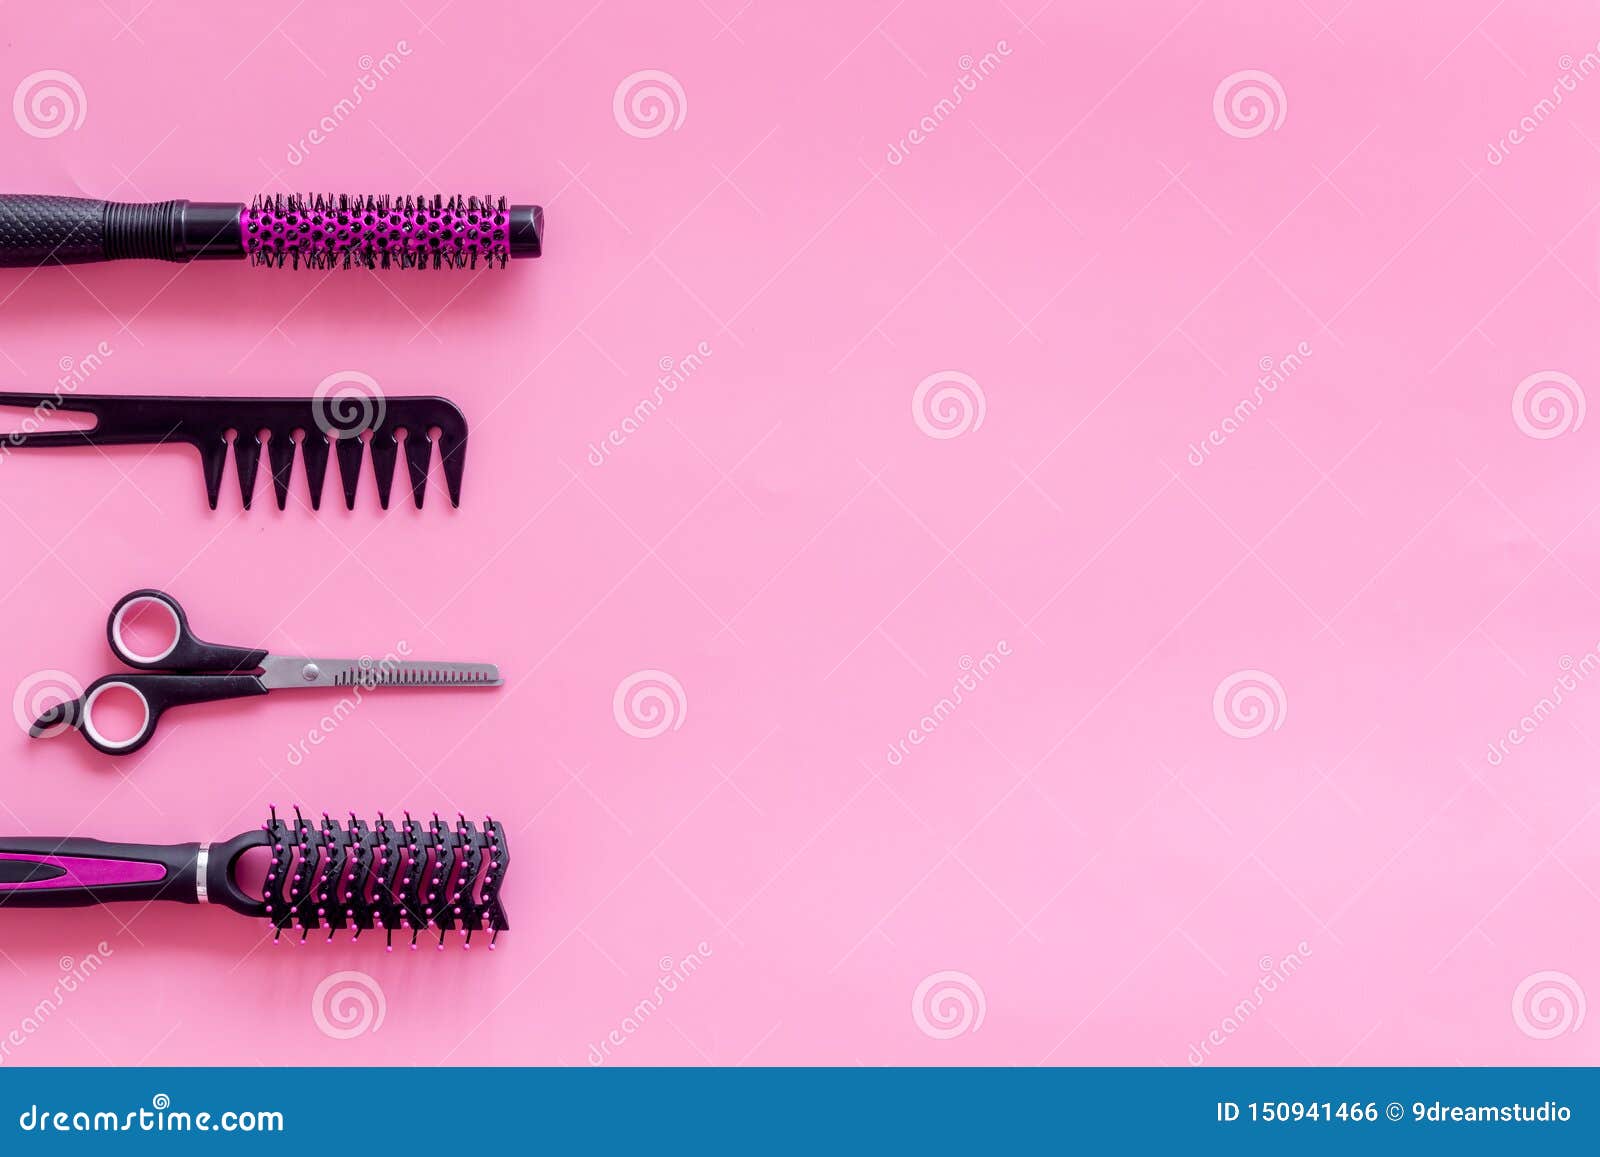 Hairdresser Equipment for Cutting Hair and Styling with Combs, Sciccors,  Brushes on Pink Background Top View Copyspace Stock Photo - Image of  profession, stylist: 150941466